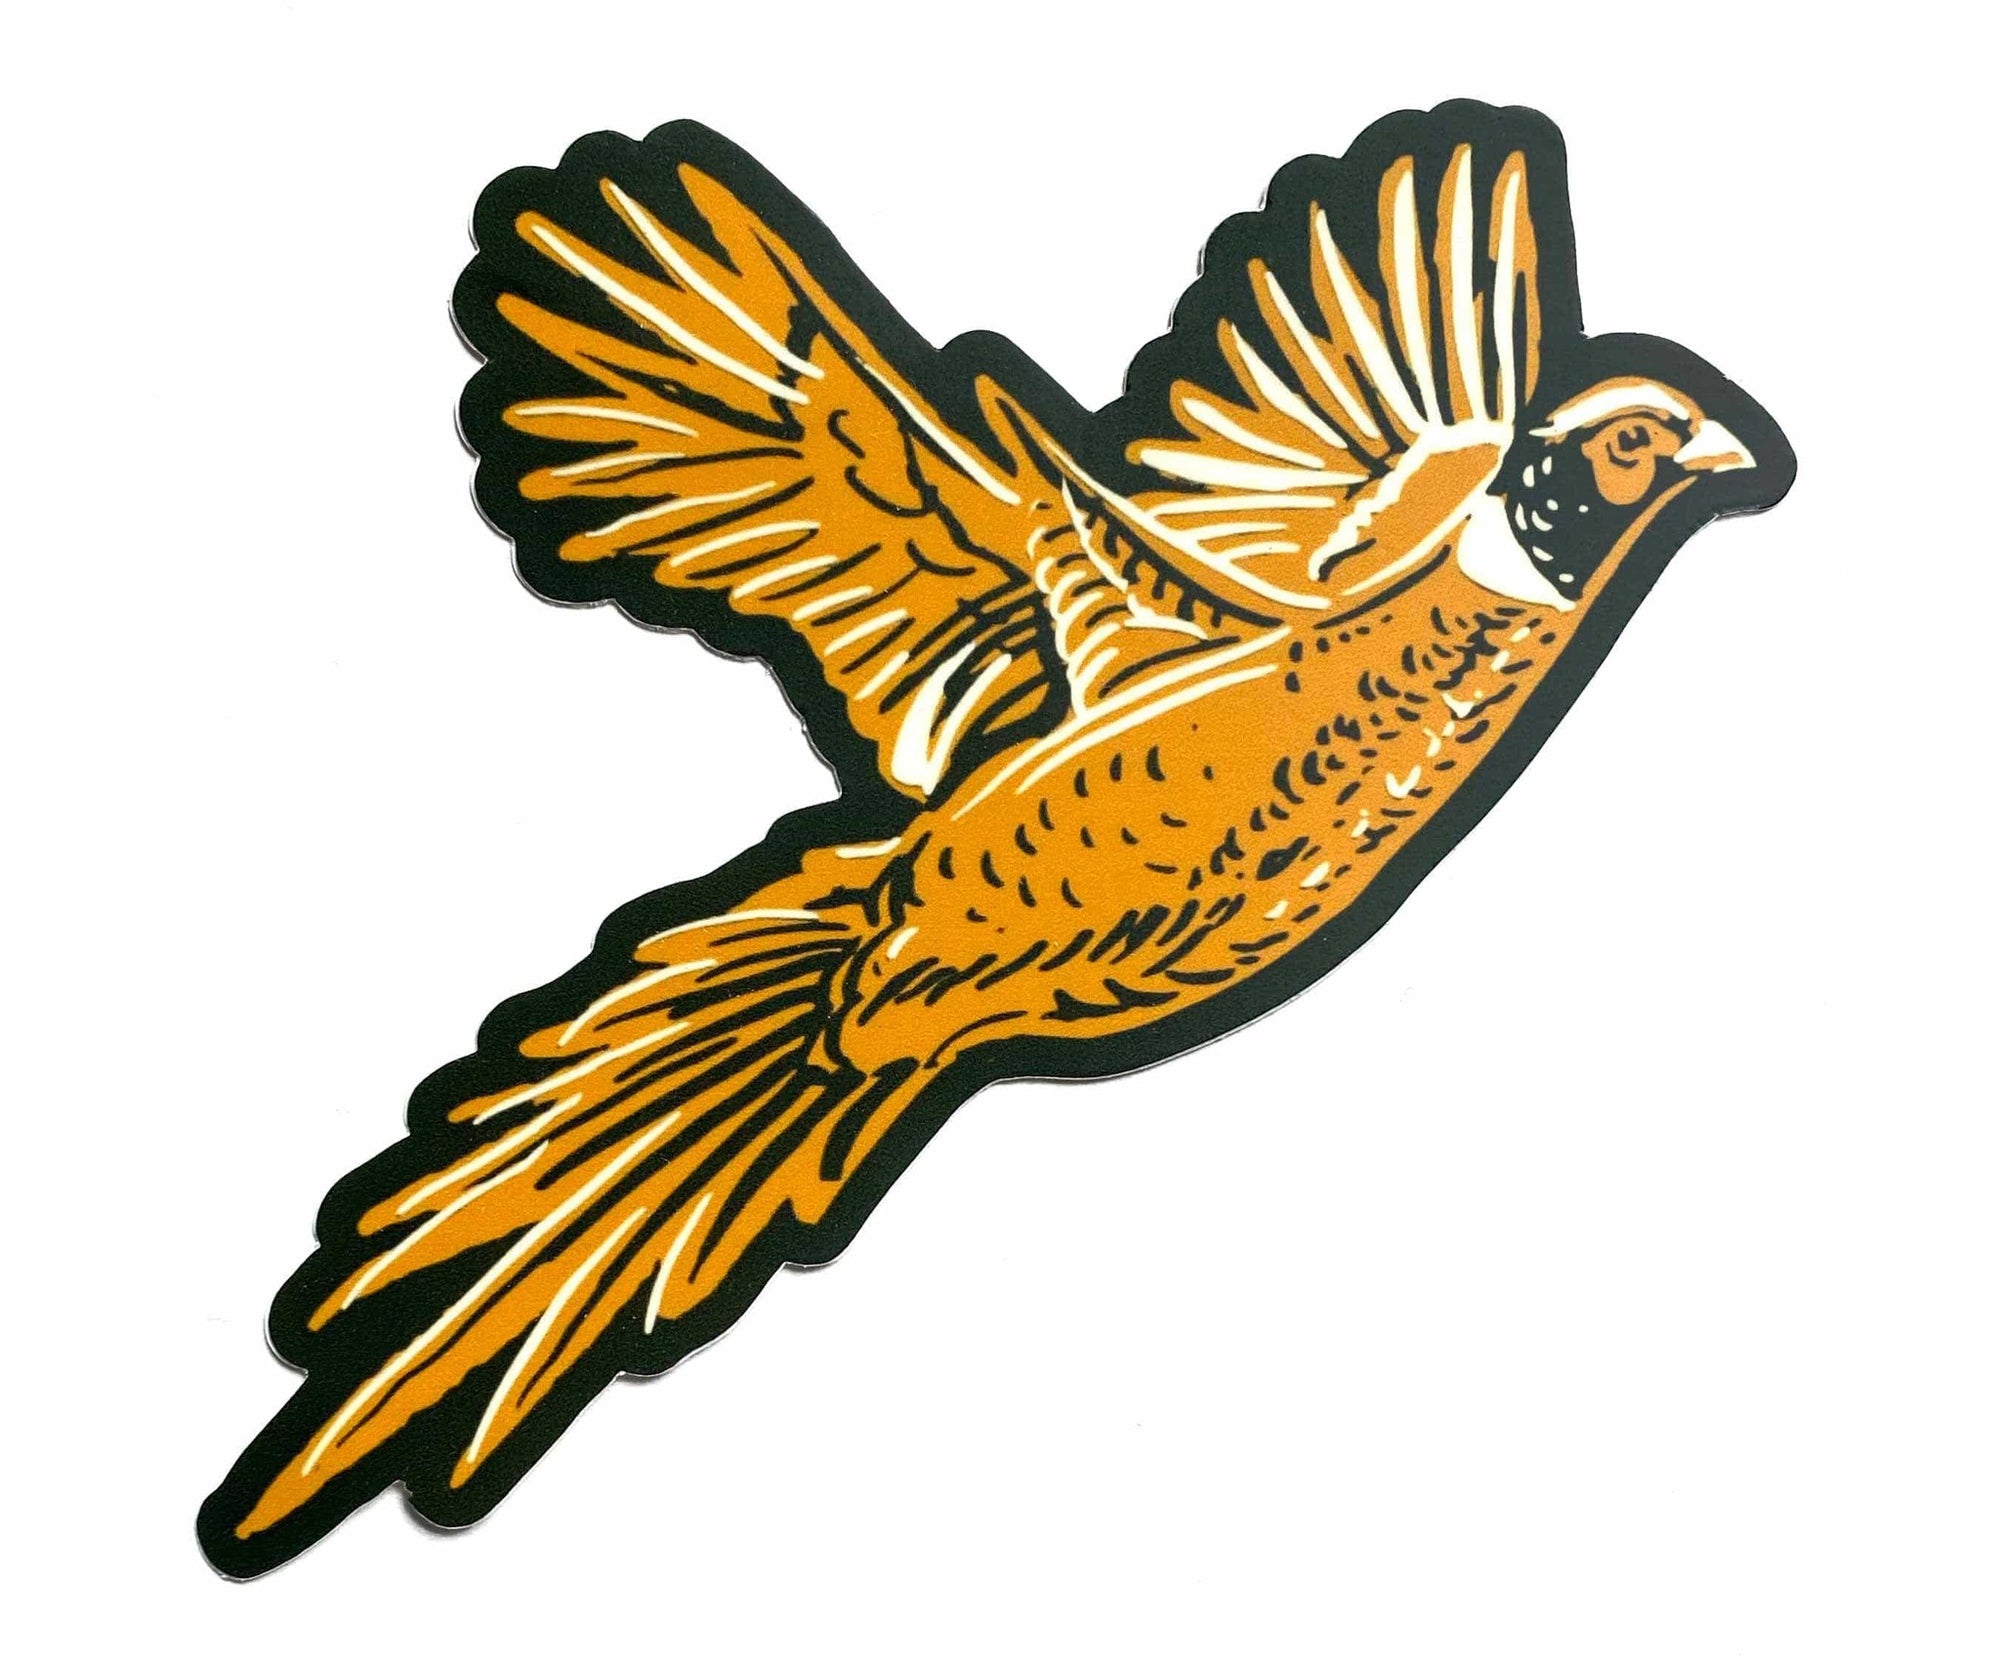 A Pheasant Sticker from The Wild Wander flying.